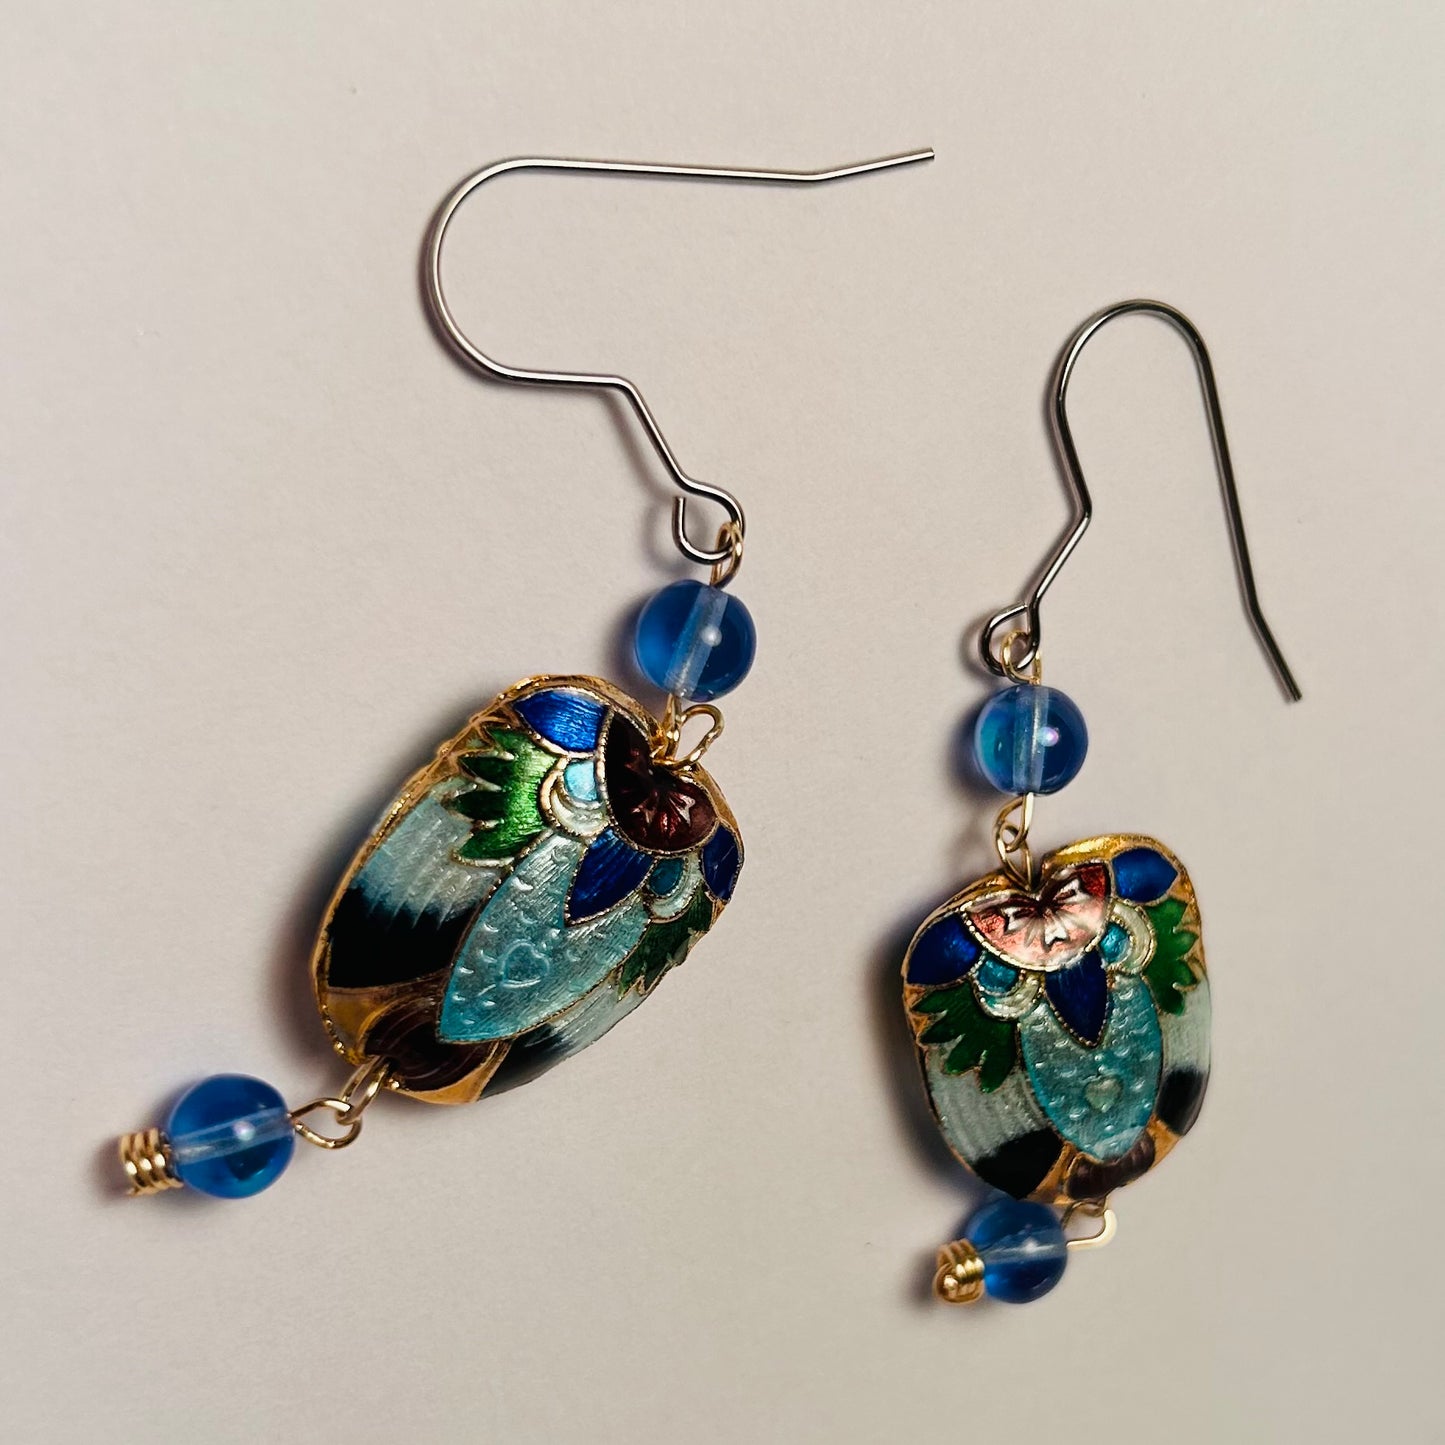 Who’s Whom, Dangling Cloisonné Earrings